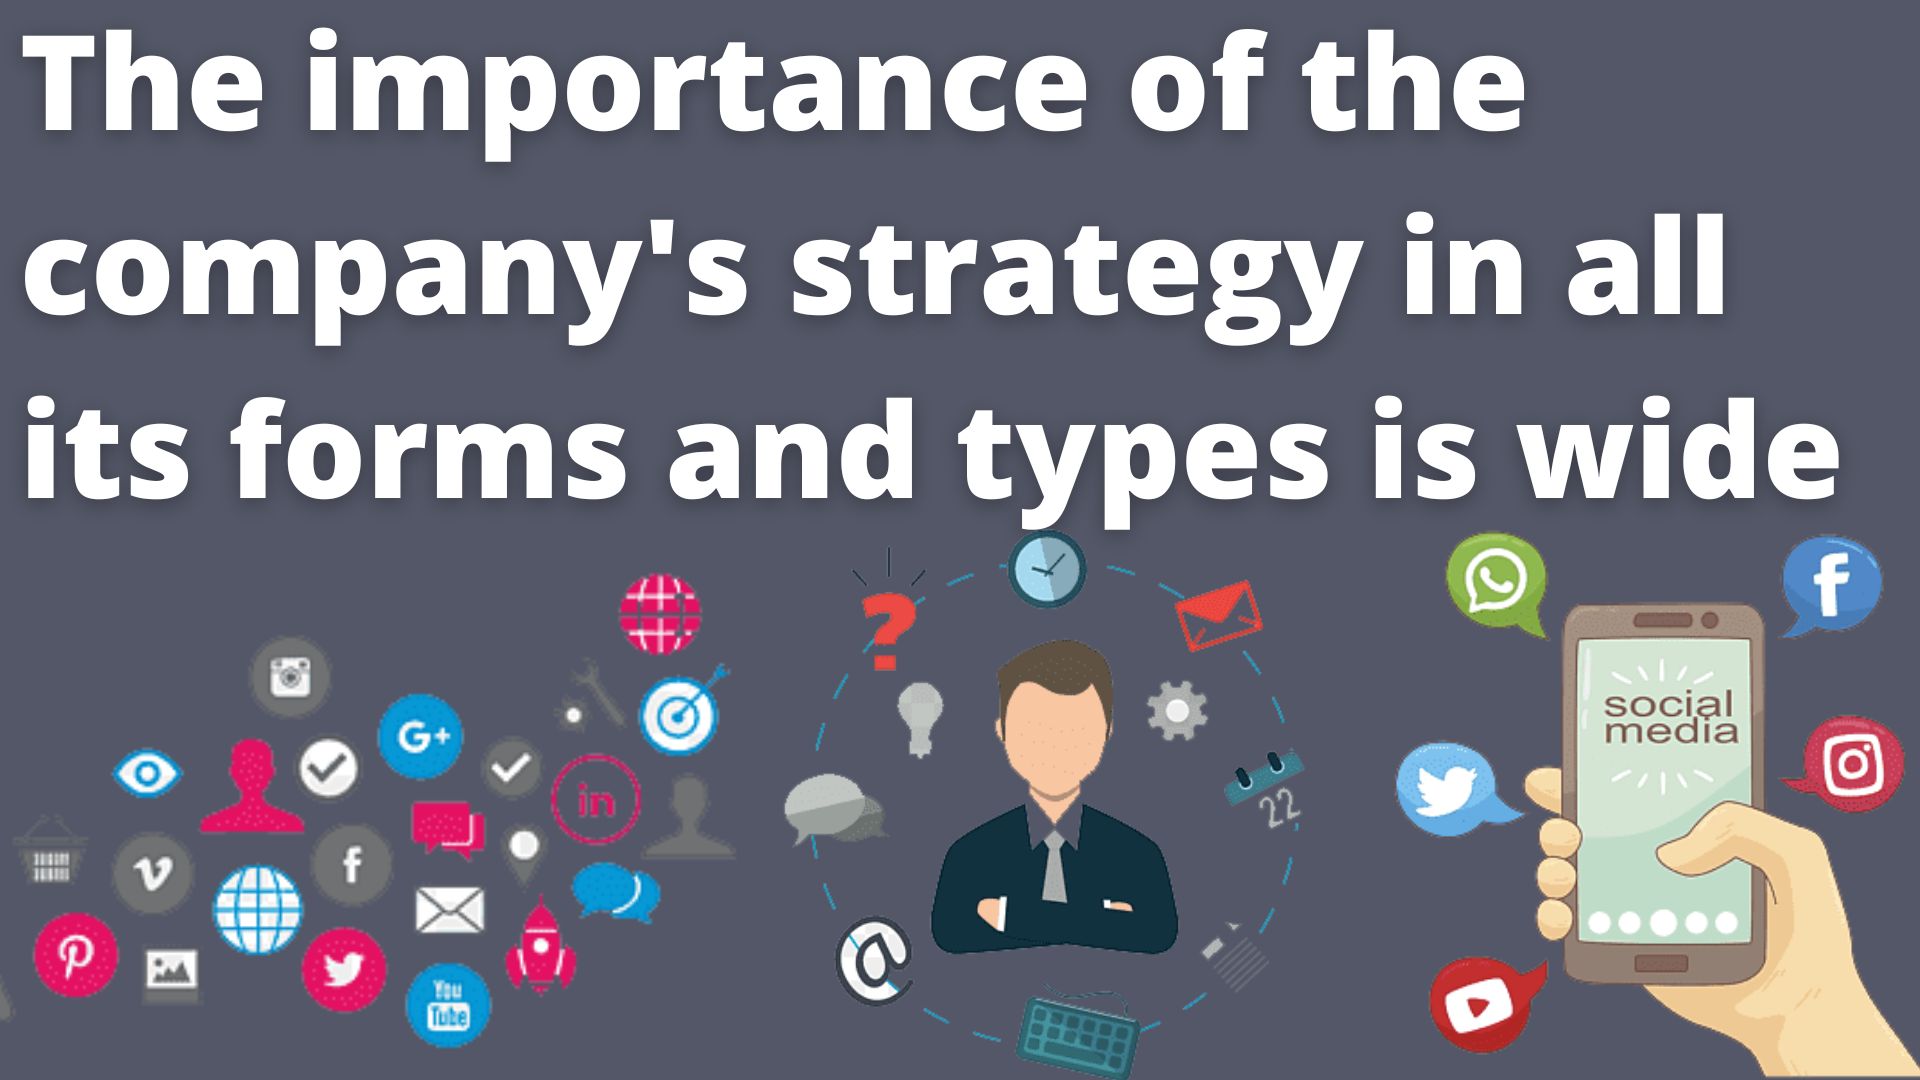 The Importance Of The Company's Strategy In All Its Forms And Types Is Wide